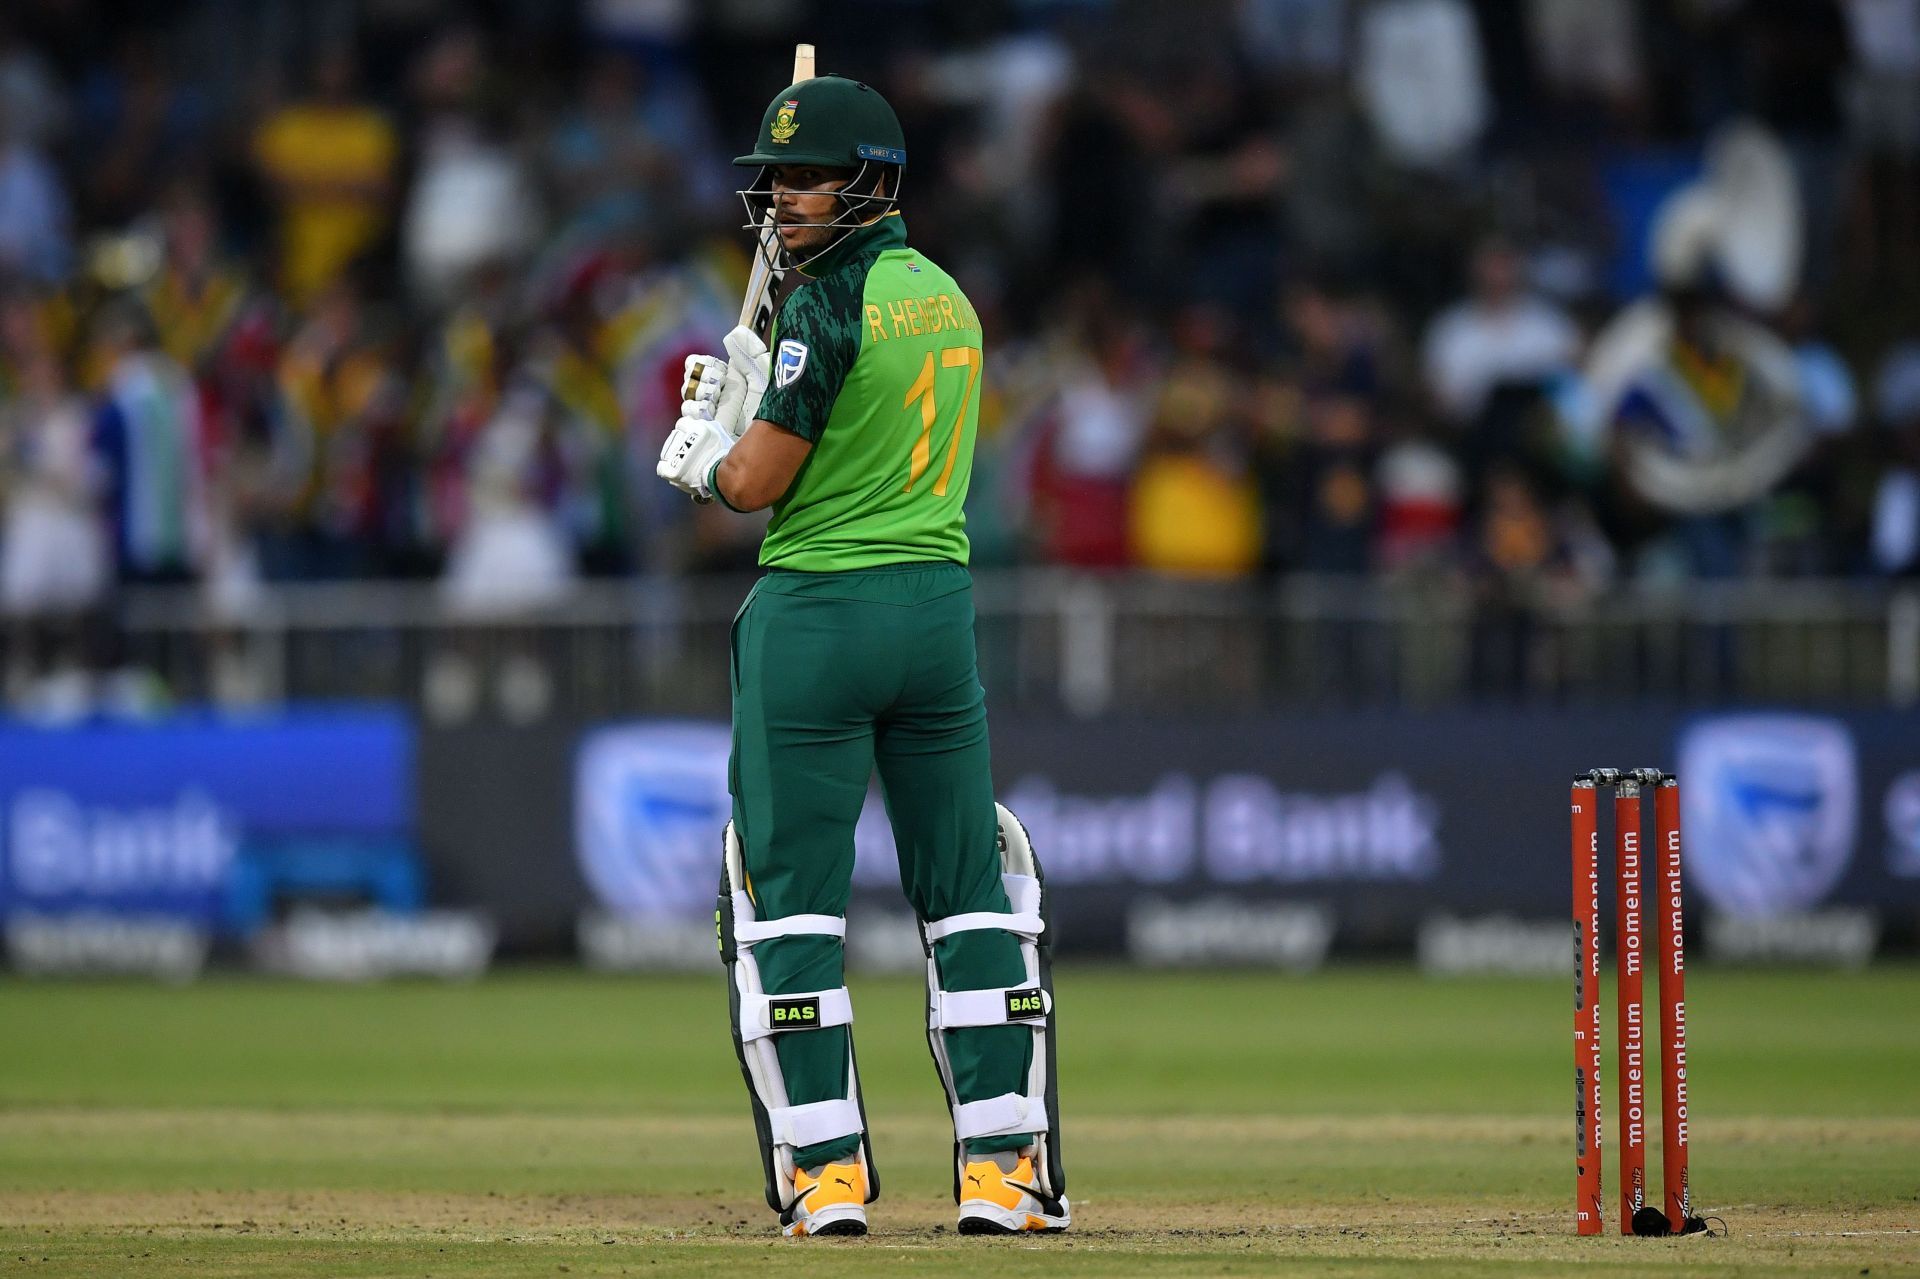 Reeza Hendricks in action in South Africa v England - 2nd ODI (Image courtesy: Getty Images)